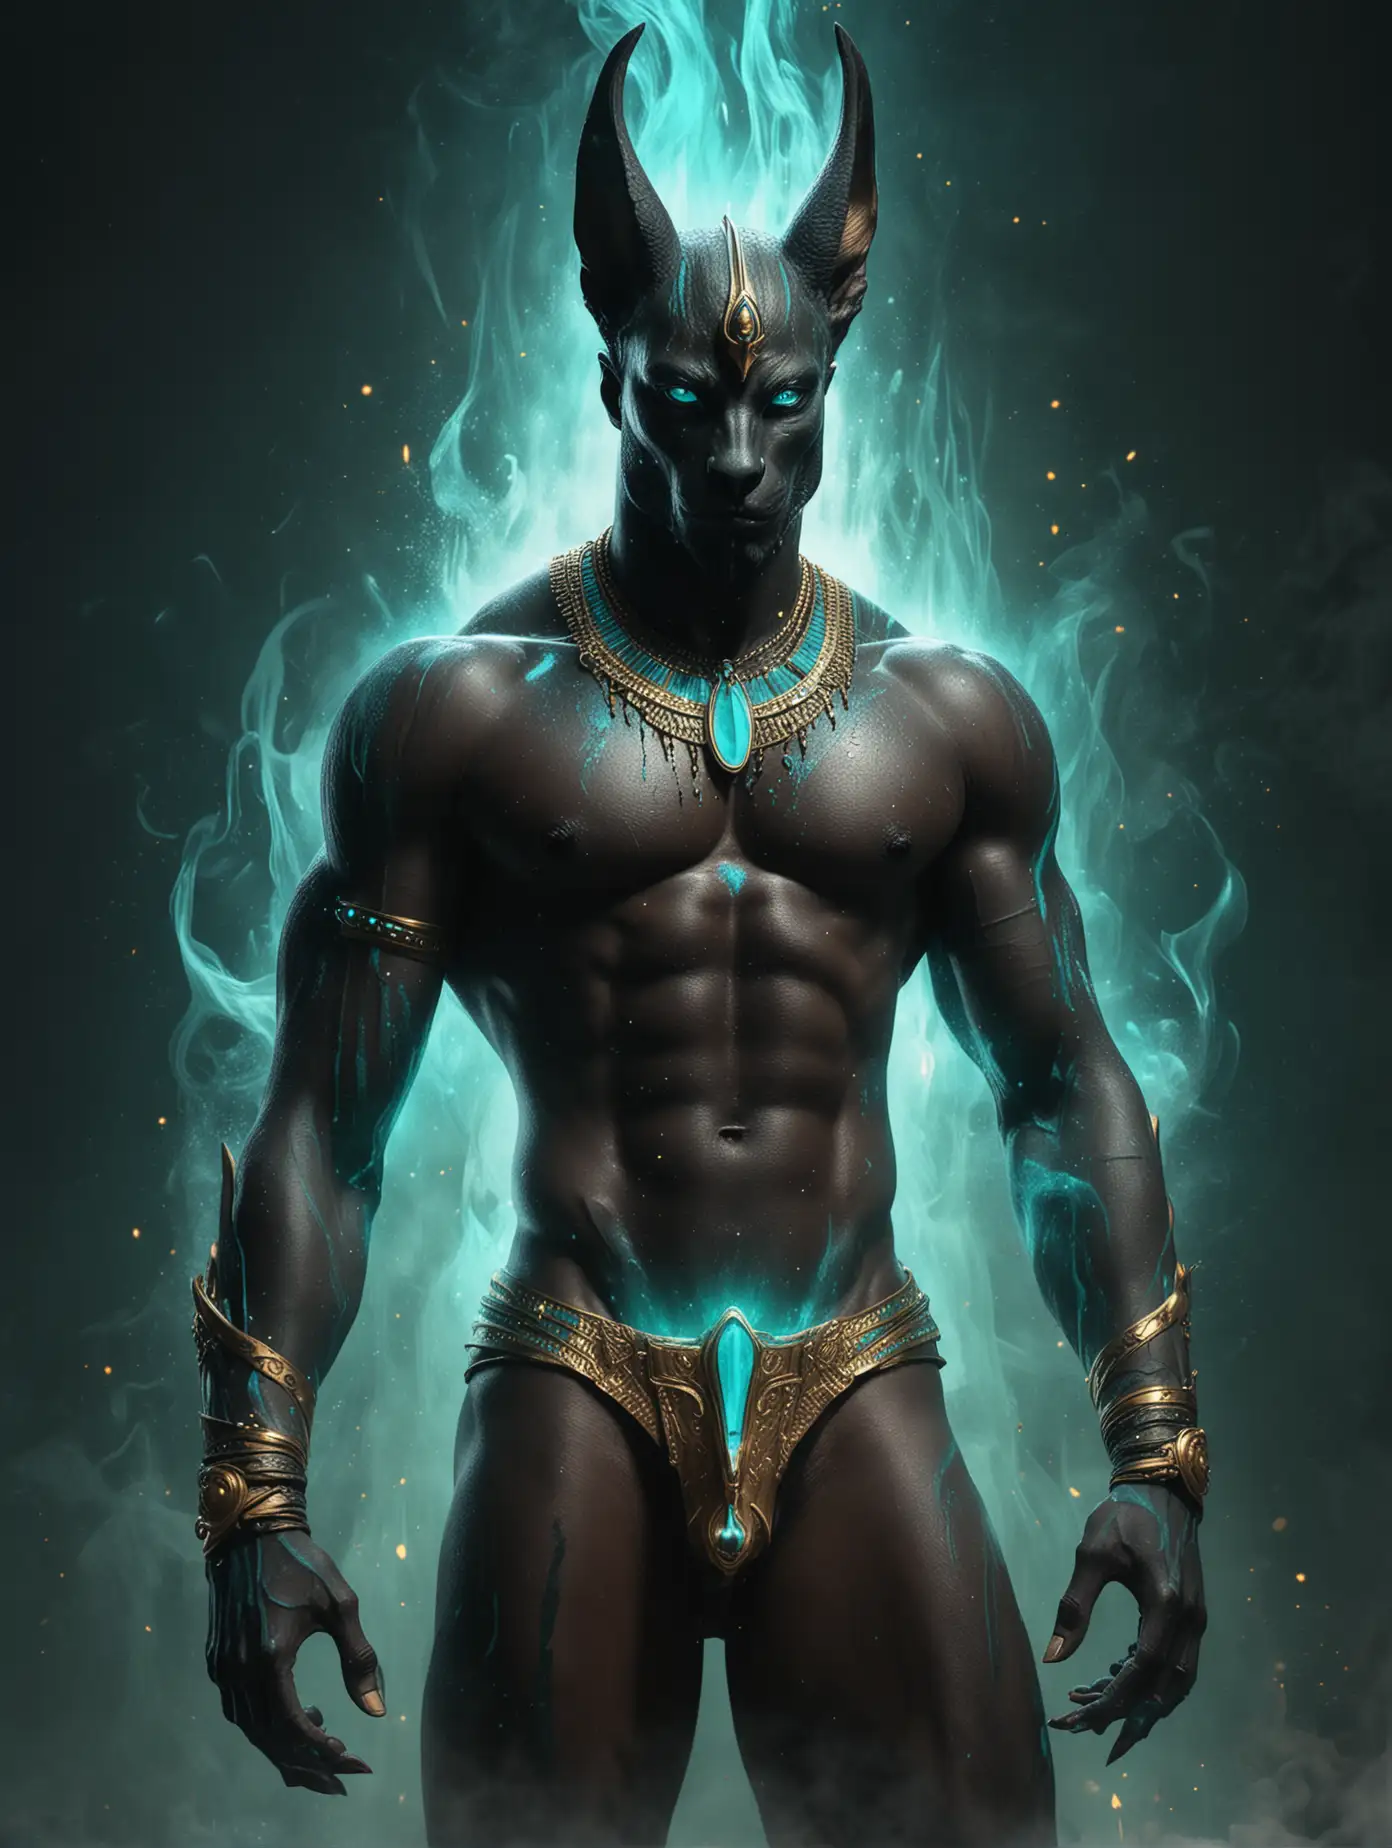 Illustration of a handsome Anubis man, he is sexy and muscular, shirtless, his body is black, his eyes are led turquoise, he is naked,  there's a turquoise glow coming from his crotch, there's black and turquoise fog, turquoise flames, gold sparks, up close